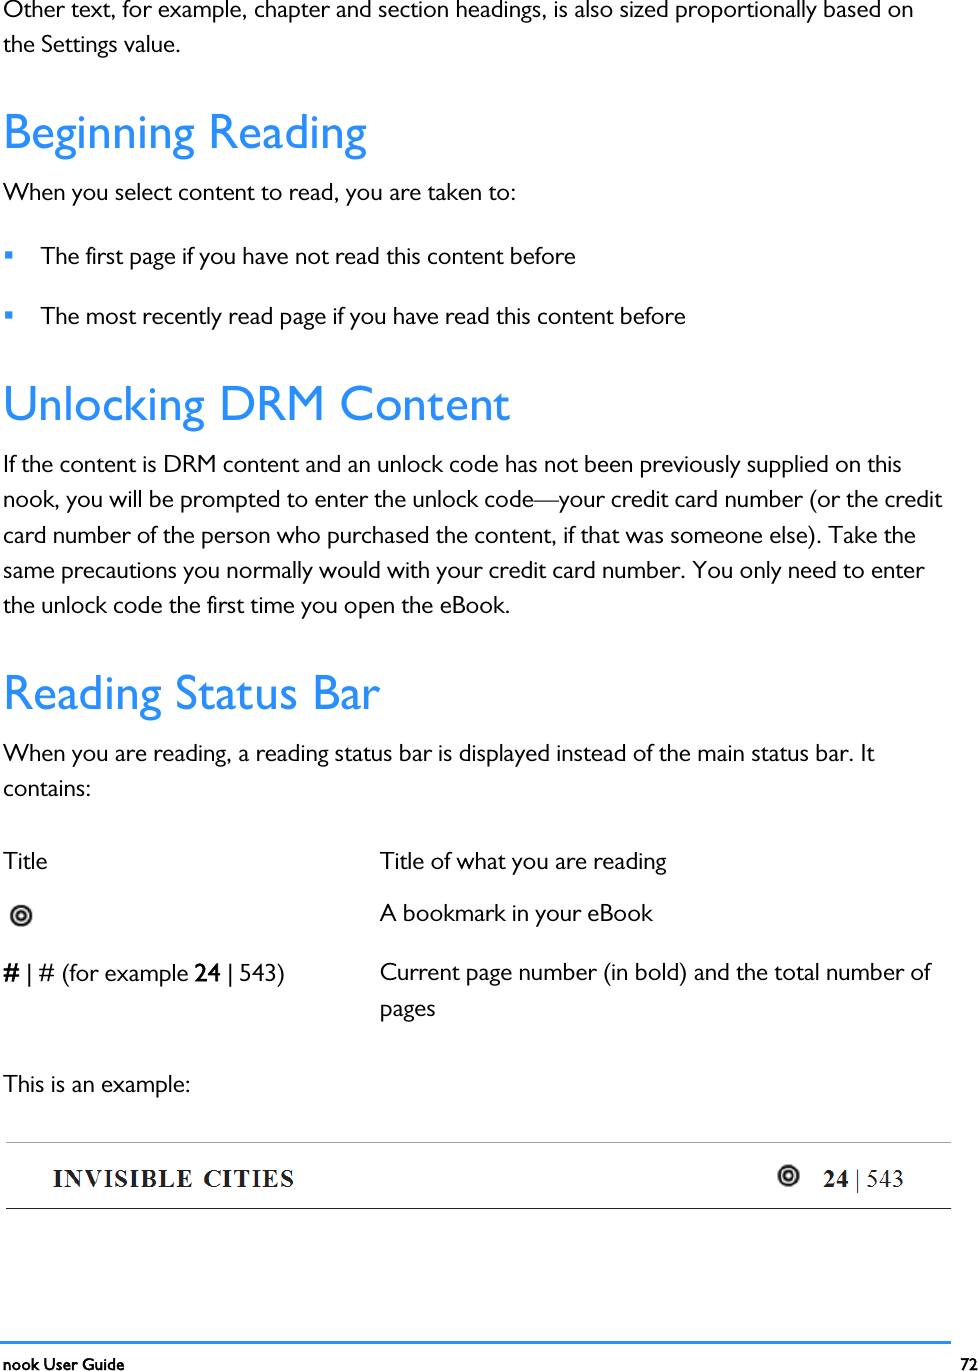  nook User Guide    72        Other text, for example, chapter and section headings, is also sized proportionally based on the Settings value. Beginning Reading When you select content to read, you are taken to:  The first page if you have not read this content before  The most recently read page if you have read this content before Unlocking DRM Content If the content is DRM content and an unlock code has not been previously supplied on this nook, you will be prompted to enter the unlock code—your credit card number (or the credit card number of the person who purchased the content, if that was someone else). Take the same precautions you normally would with your credit card number. You only need to enter the unlock code the first time you open the eBook. Reading Status Bar When you are reading, a reading status bar is displayed instead of the main status bar. It contains: Title Title of what you are reading  A bookmark in your eBook # | # (for example 24 | 543)  Current page number (in bold) and the total number of pages This is an example:  